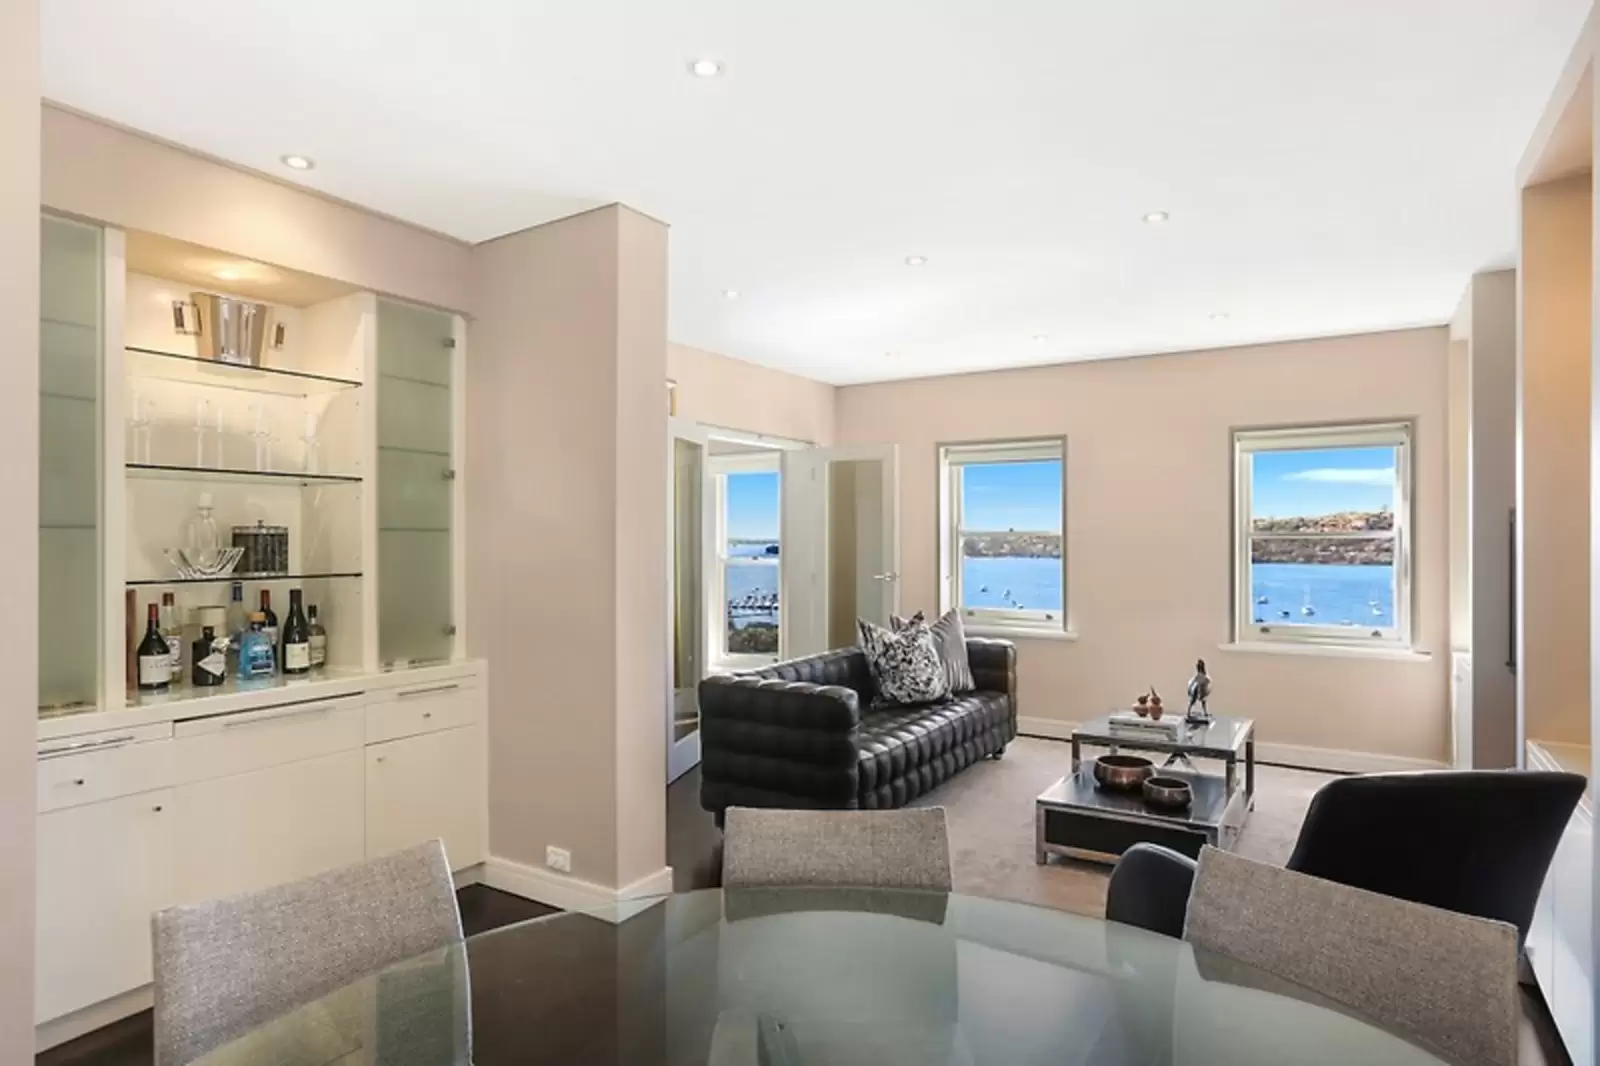 2/6 Aston Gardens, Bellevue Hill Leased by Sydney Sotheby's International Realty - image 4